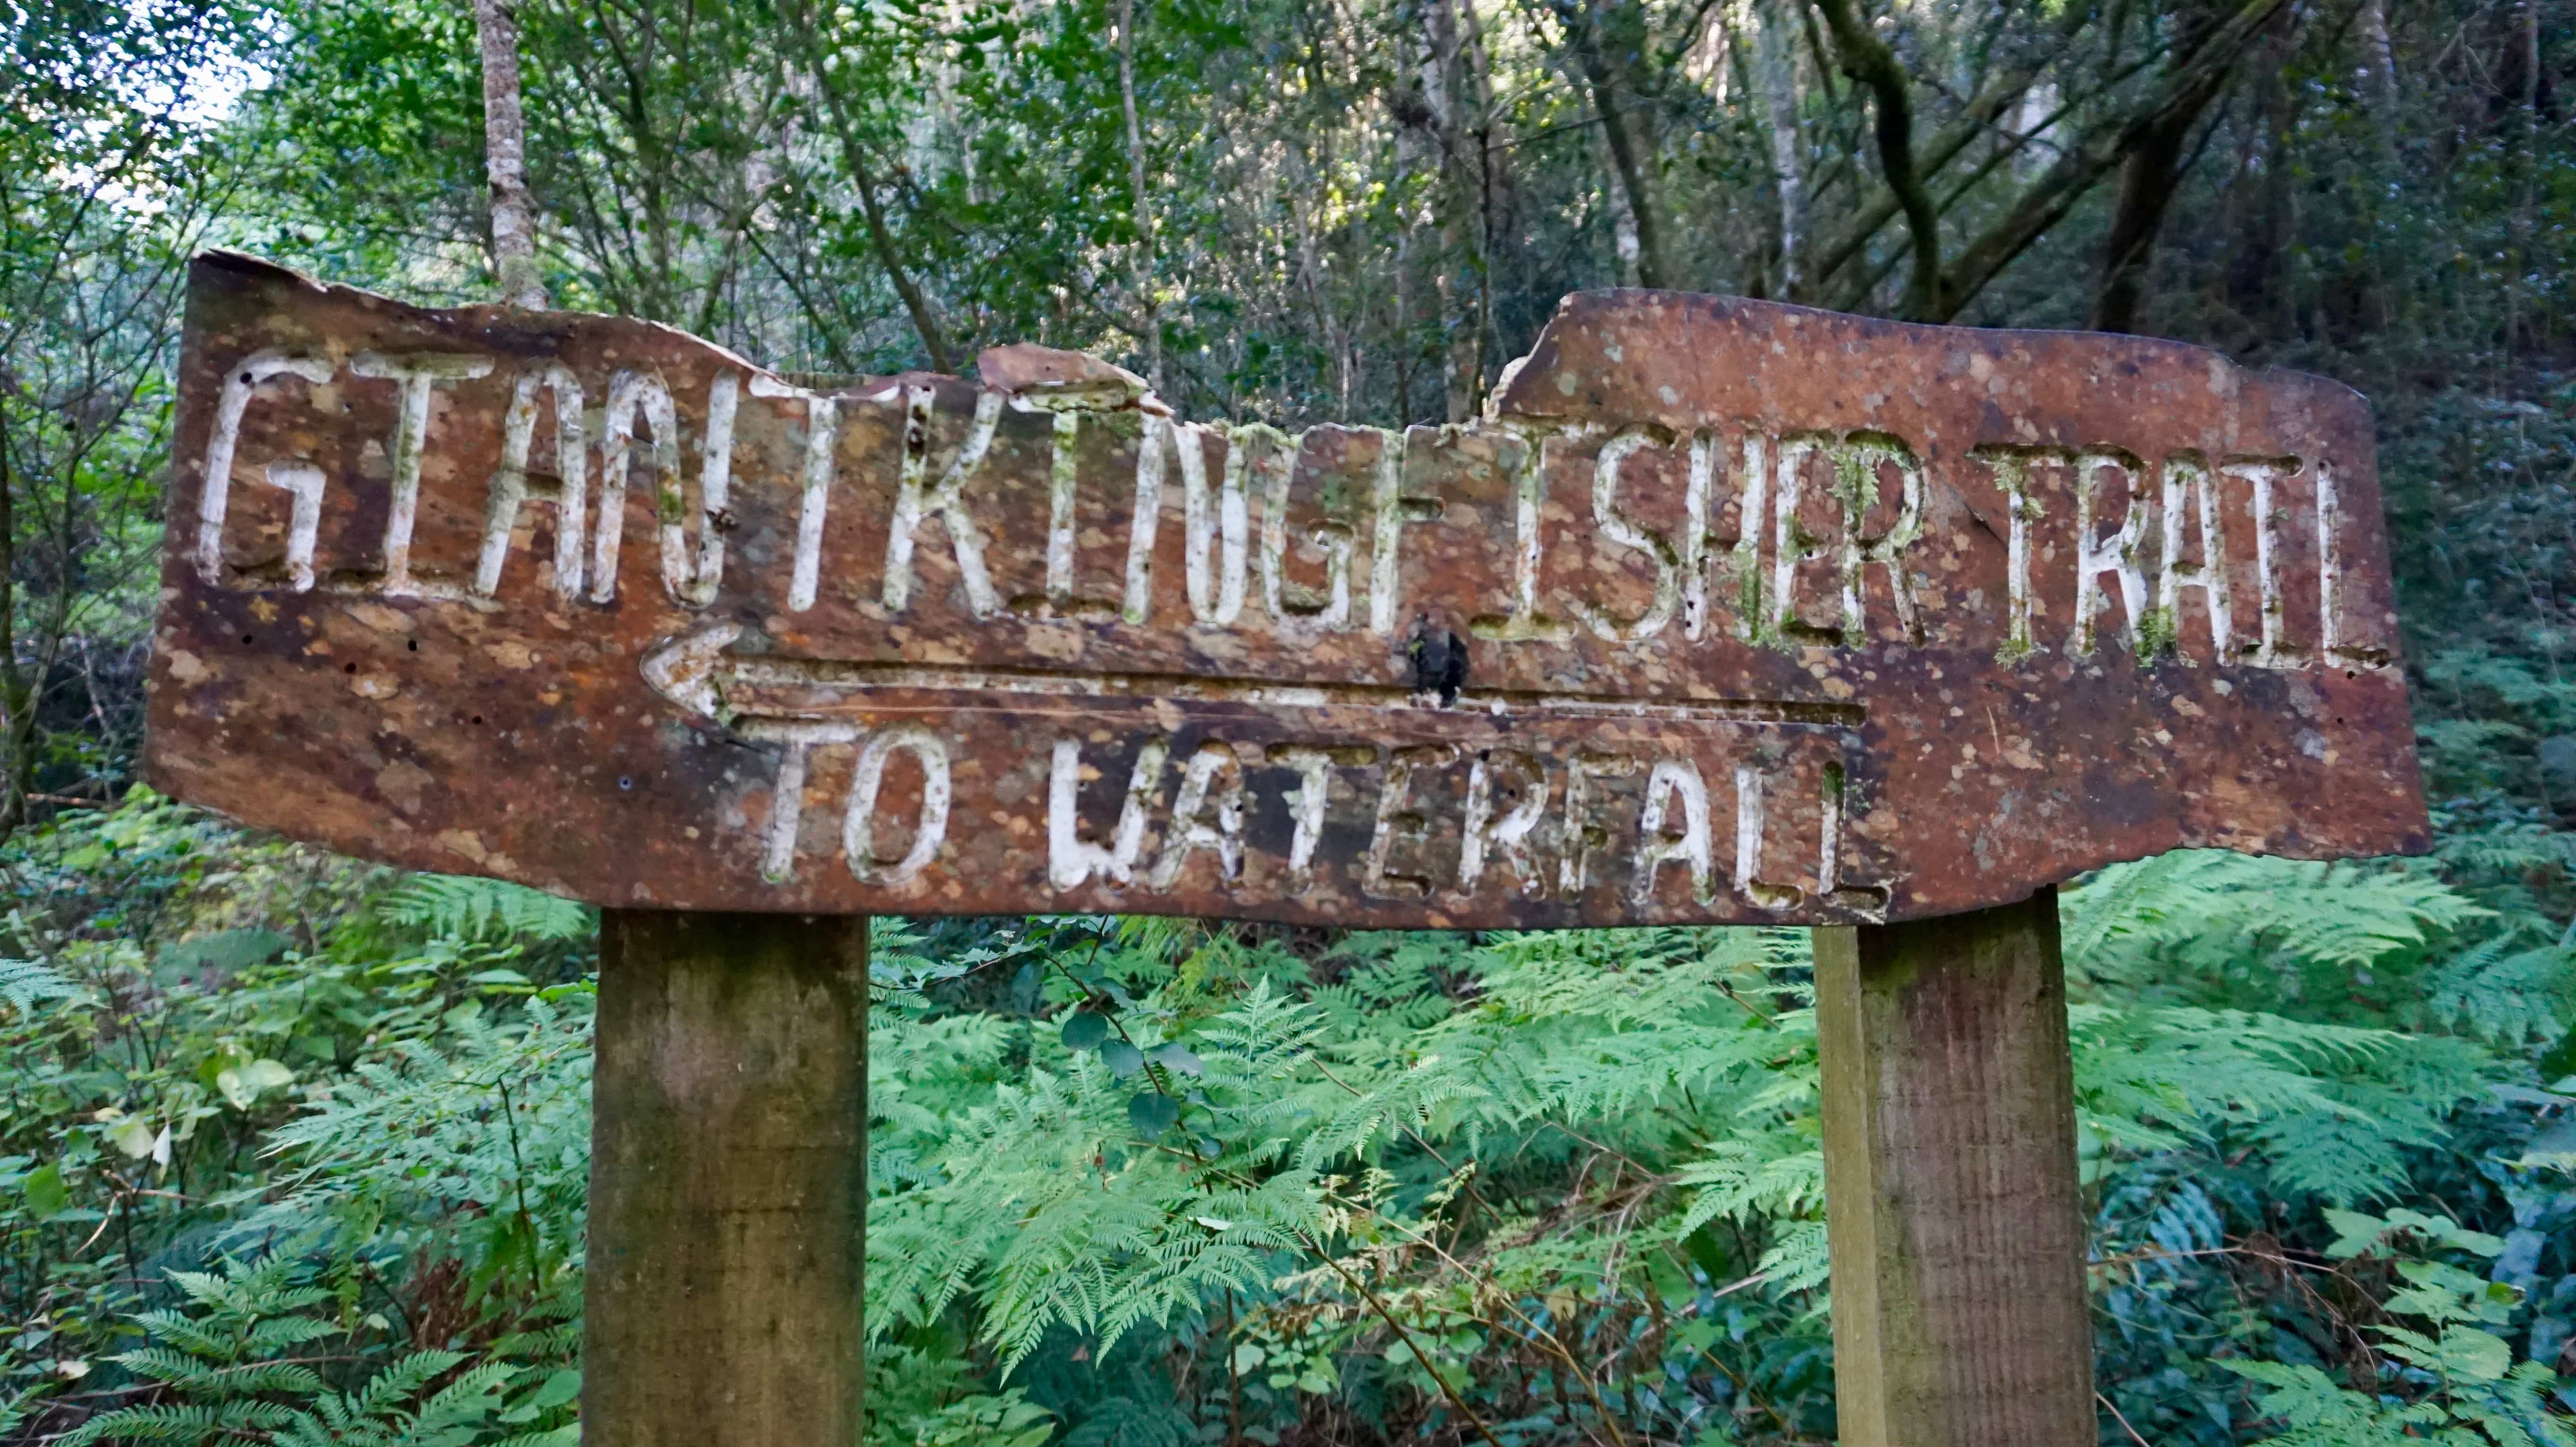 Giant Kingfisher Trail sign at Wilderness National Park, South Africa